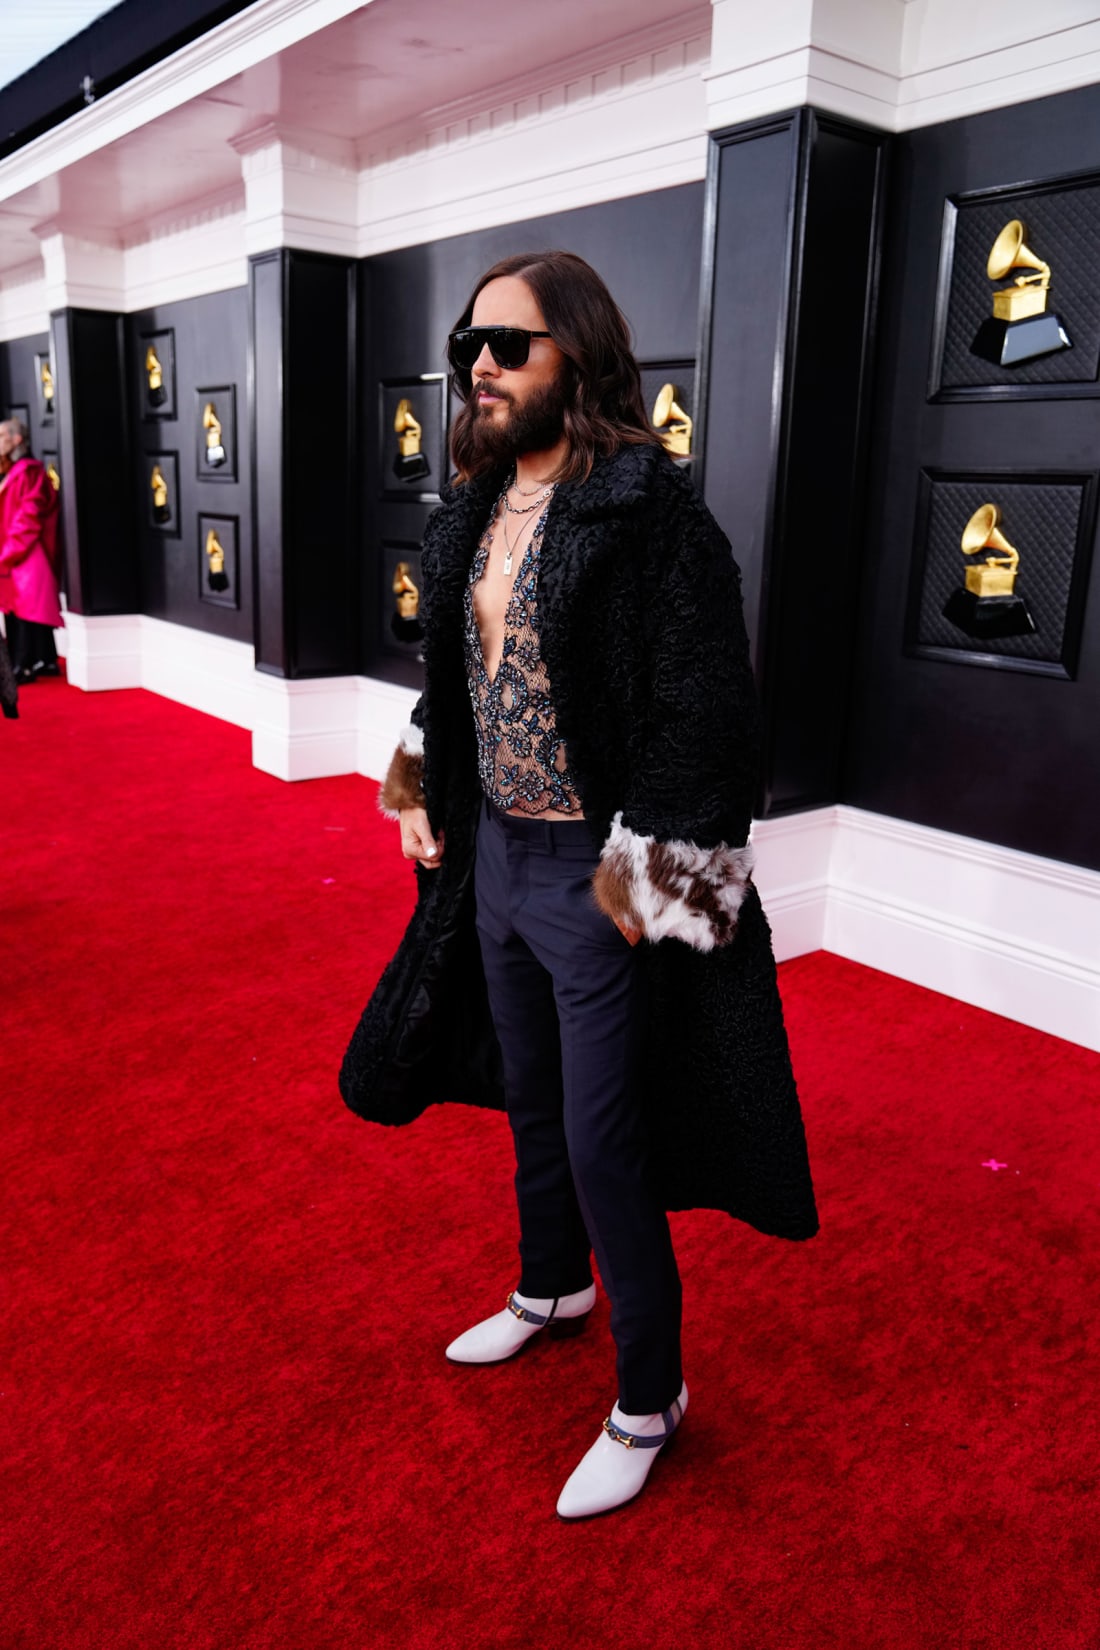 Jared Leto wore a lace top and fur-trimmed jacket by Gucci, having recently played the brand's former chief designer, Paolo, in the movie "House of Gucci."